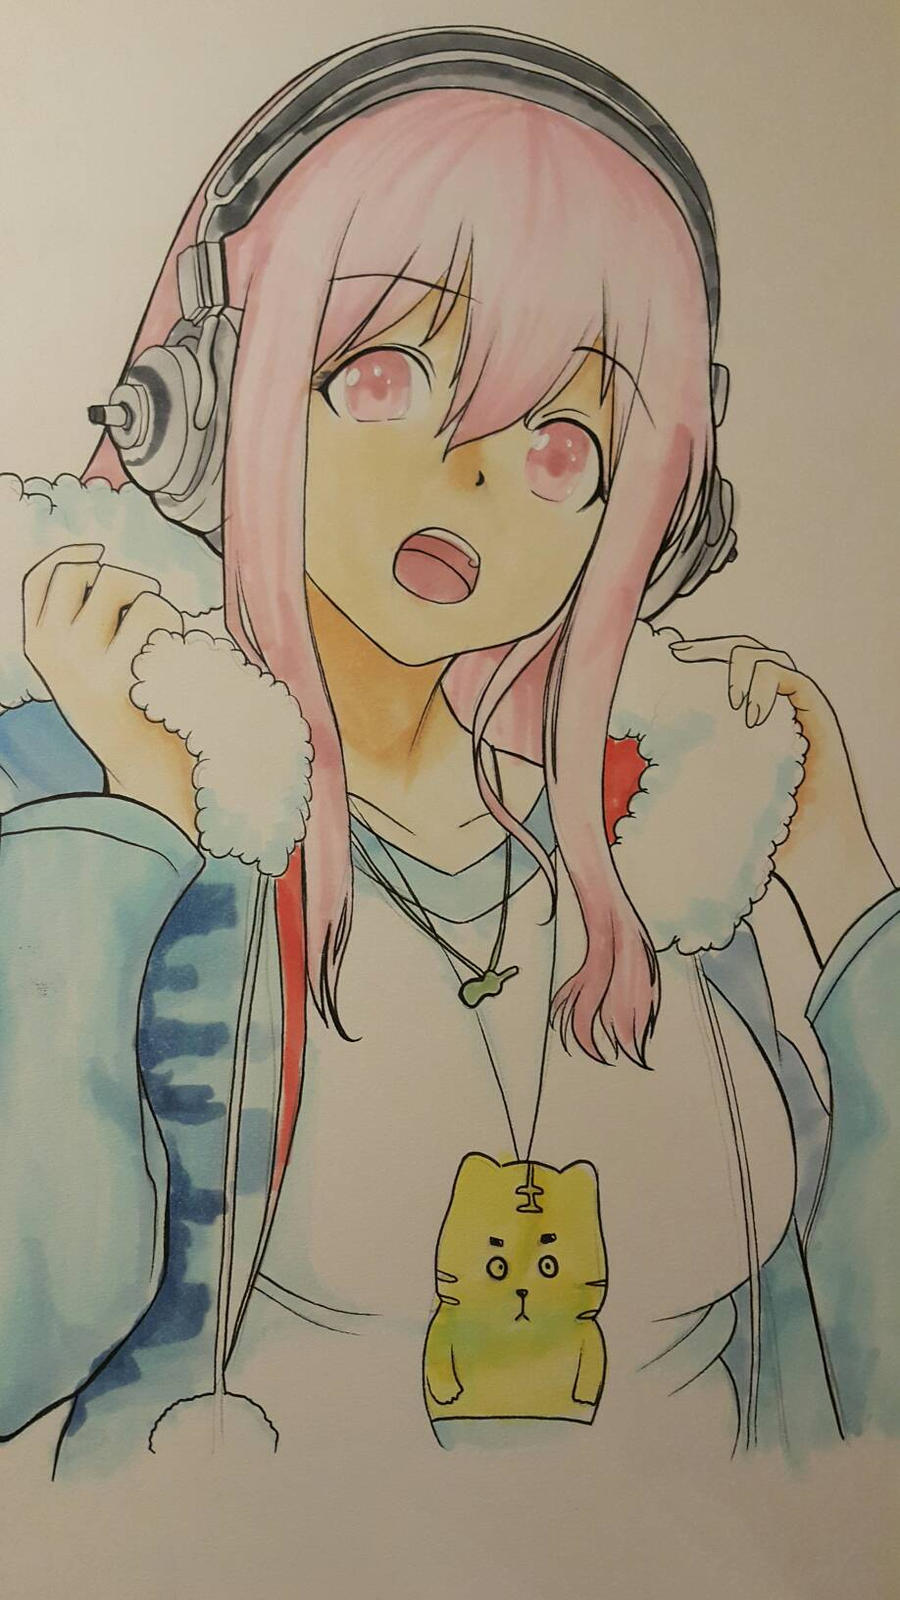 Anime girl singing by animepicturesbecause on DeviantArt